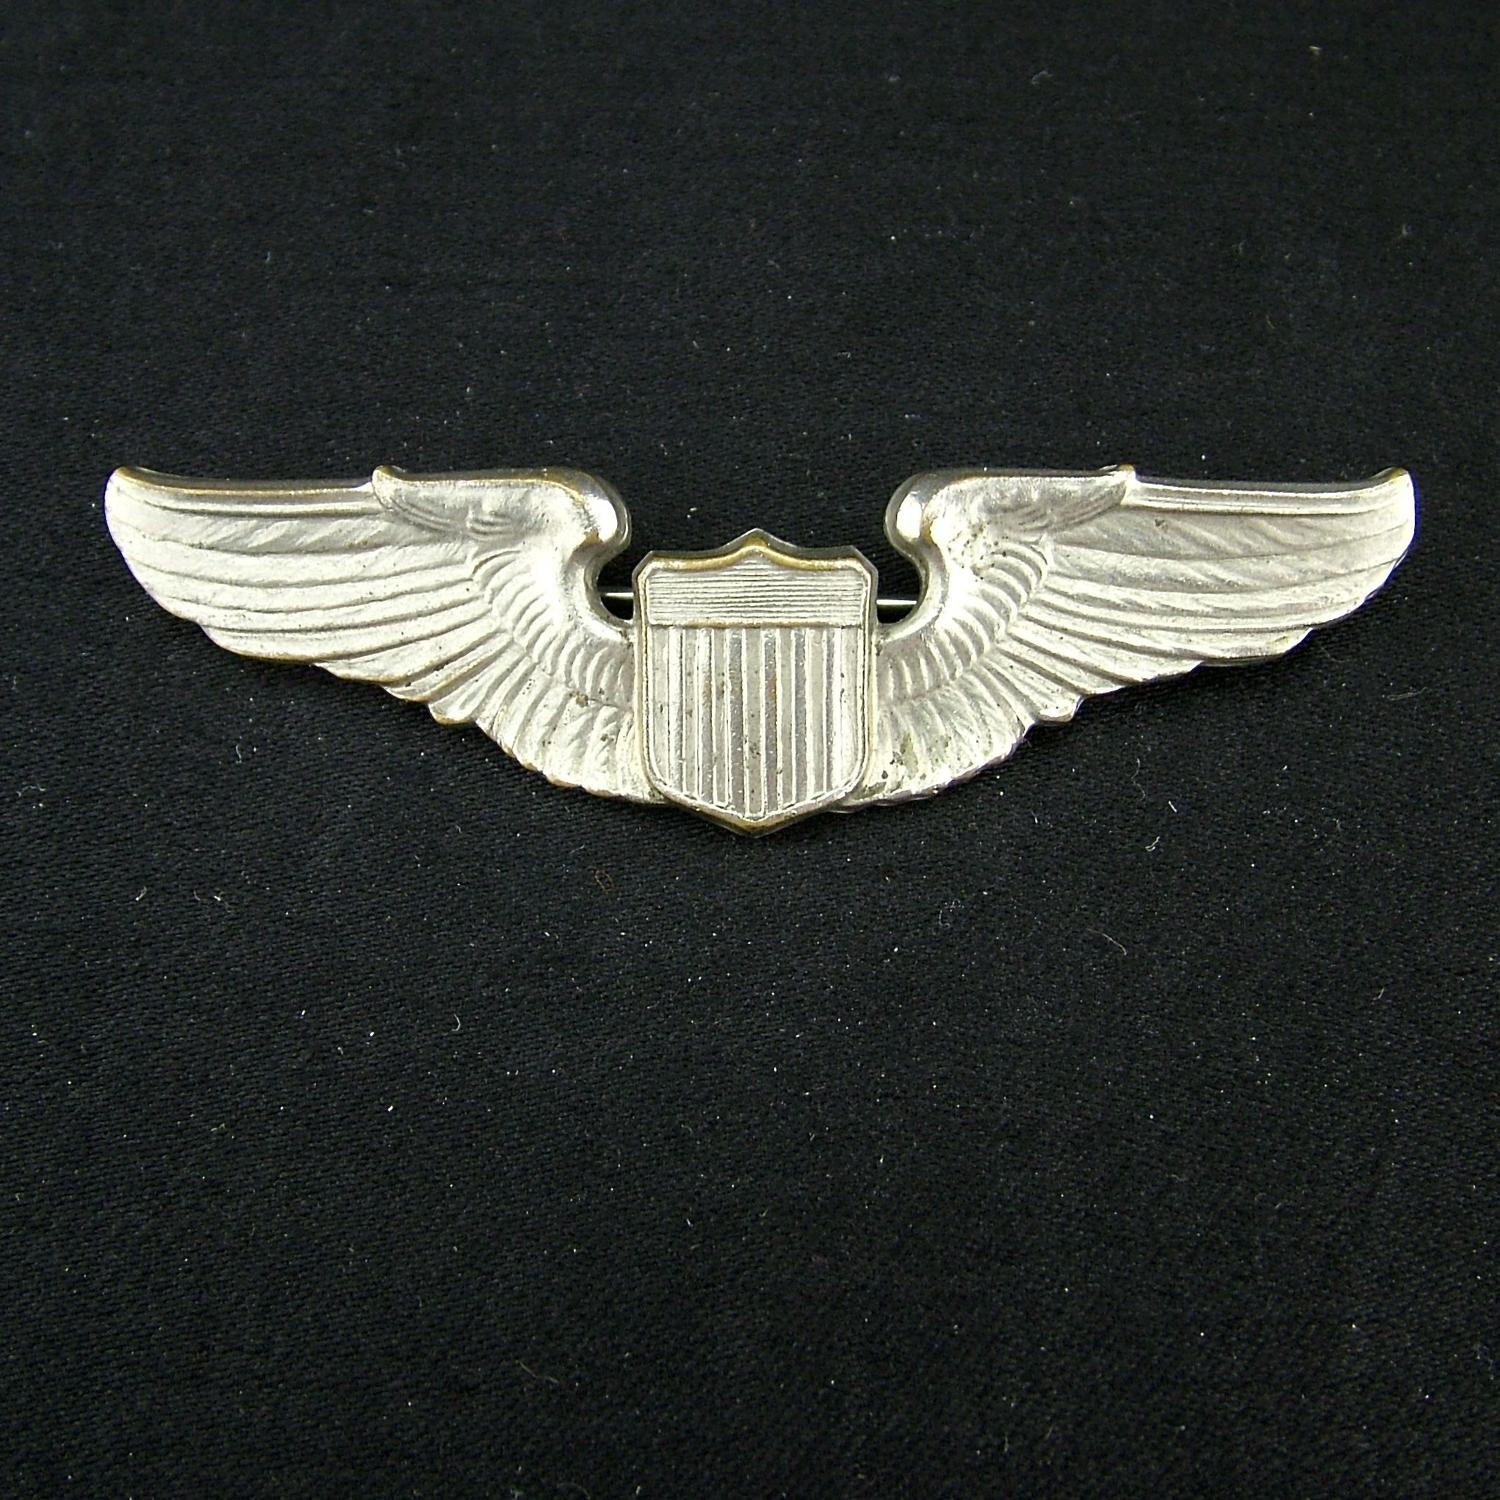 USAAF pilot wing - history